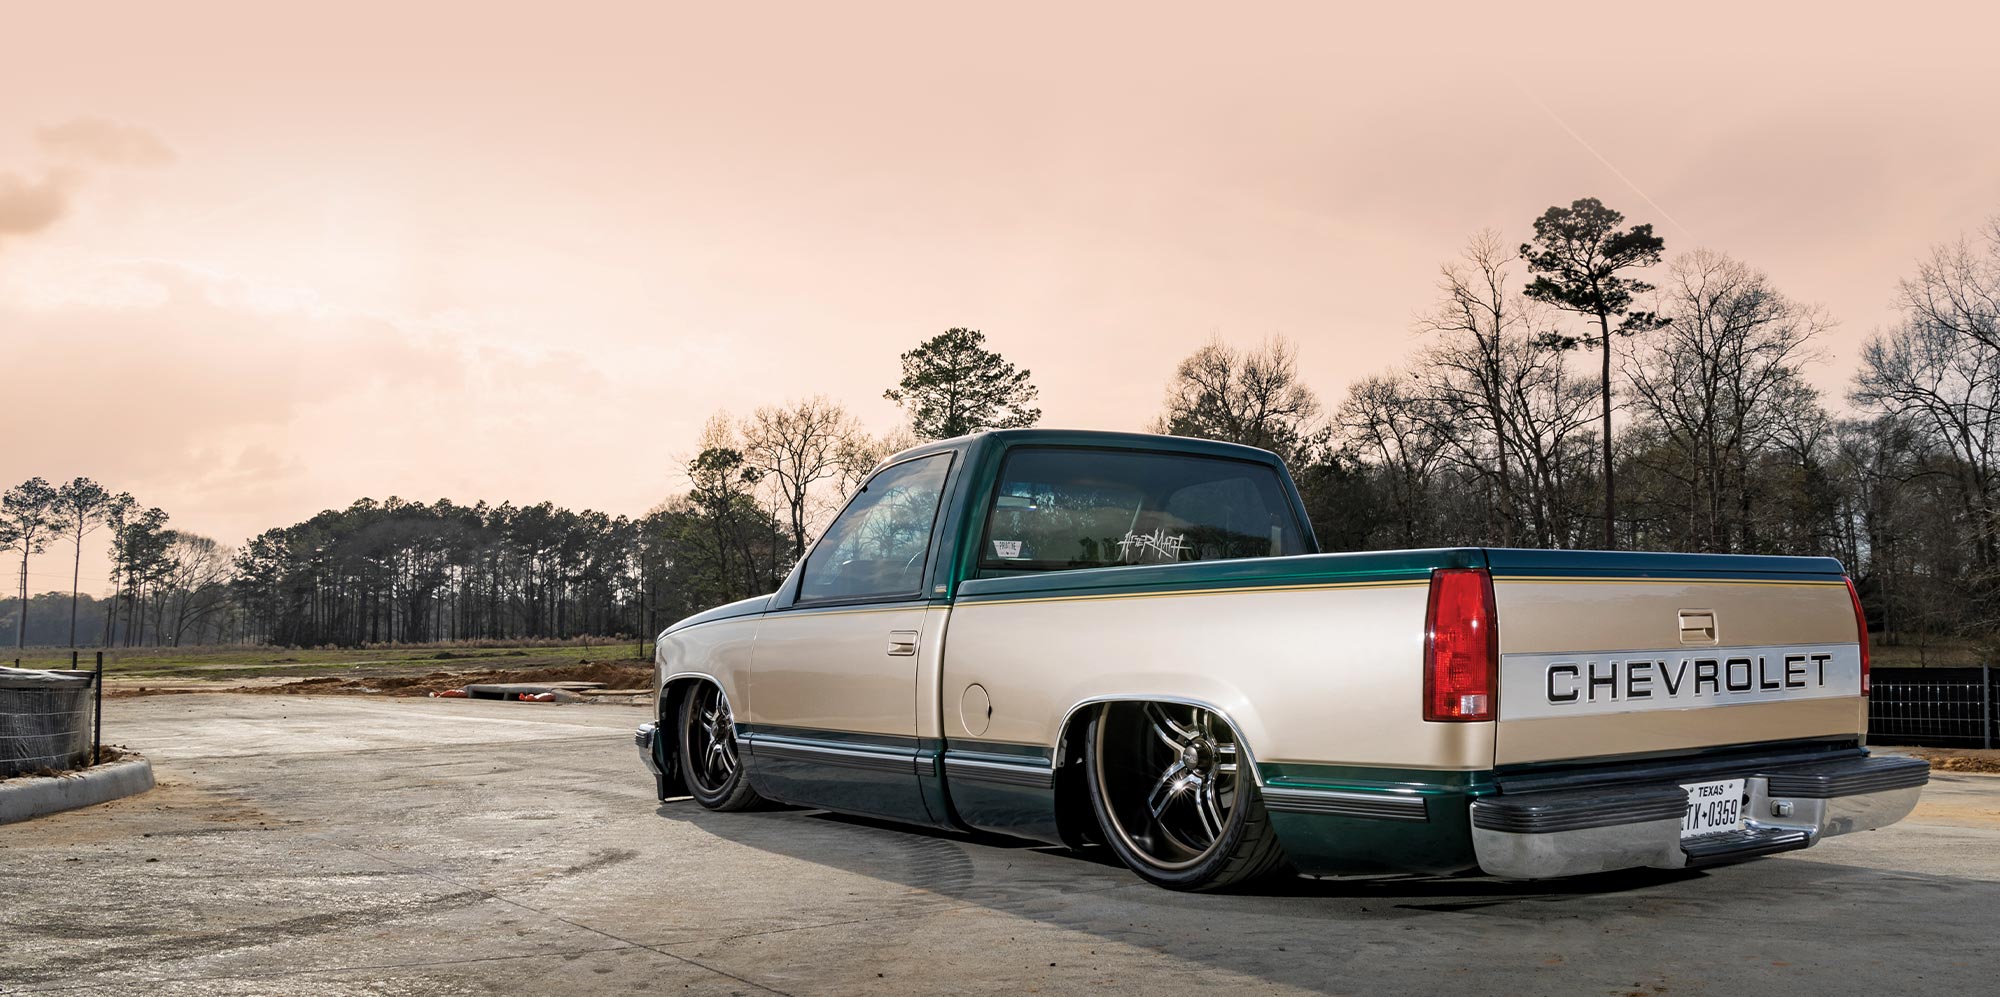 3/4ths rear drivers side view of Jose Galvan’s two-tone dark emerald green and pale gold ’88 Chevy OBS against a background of woods and a sepia sky